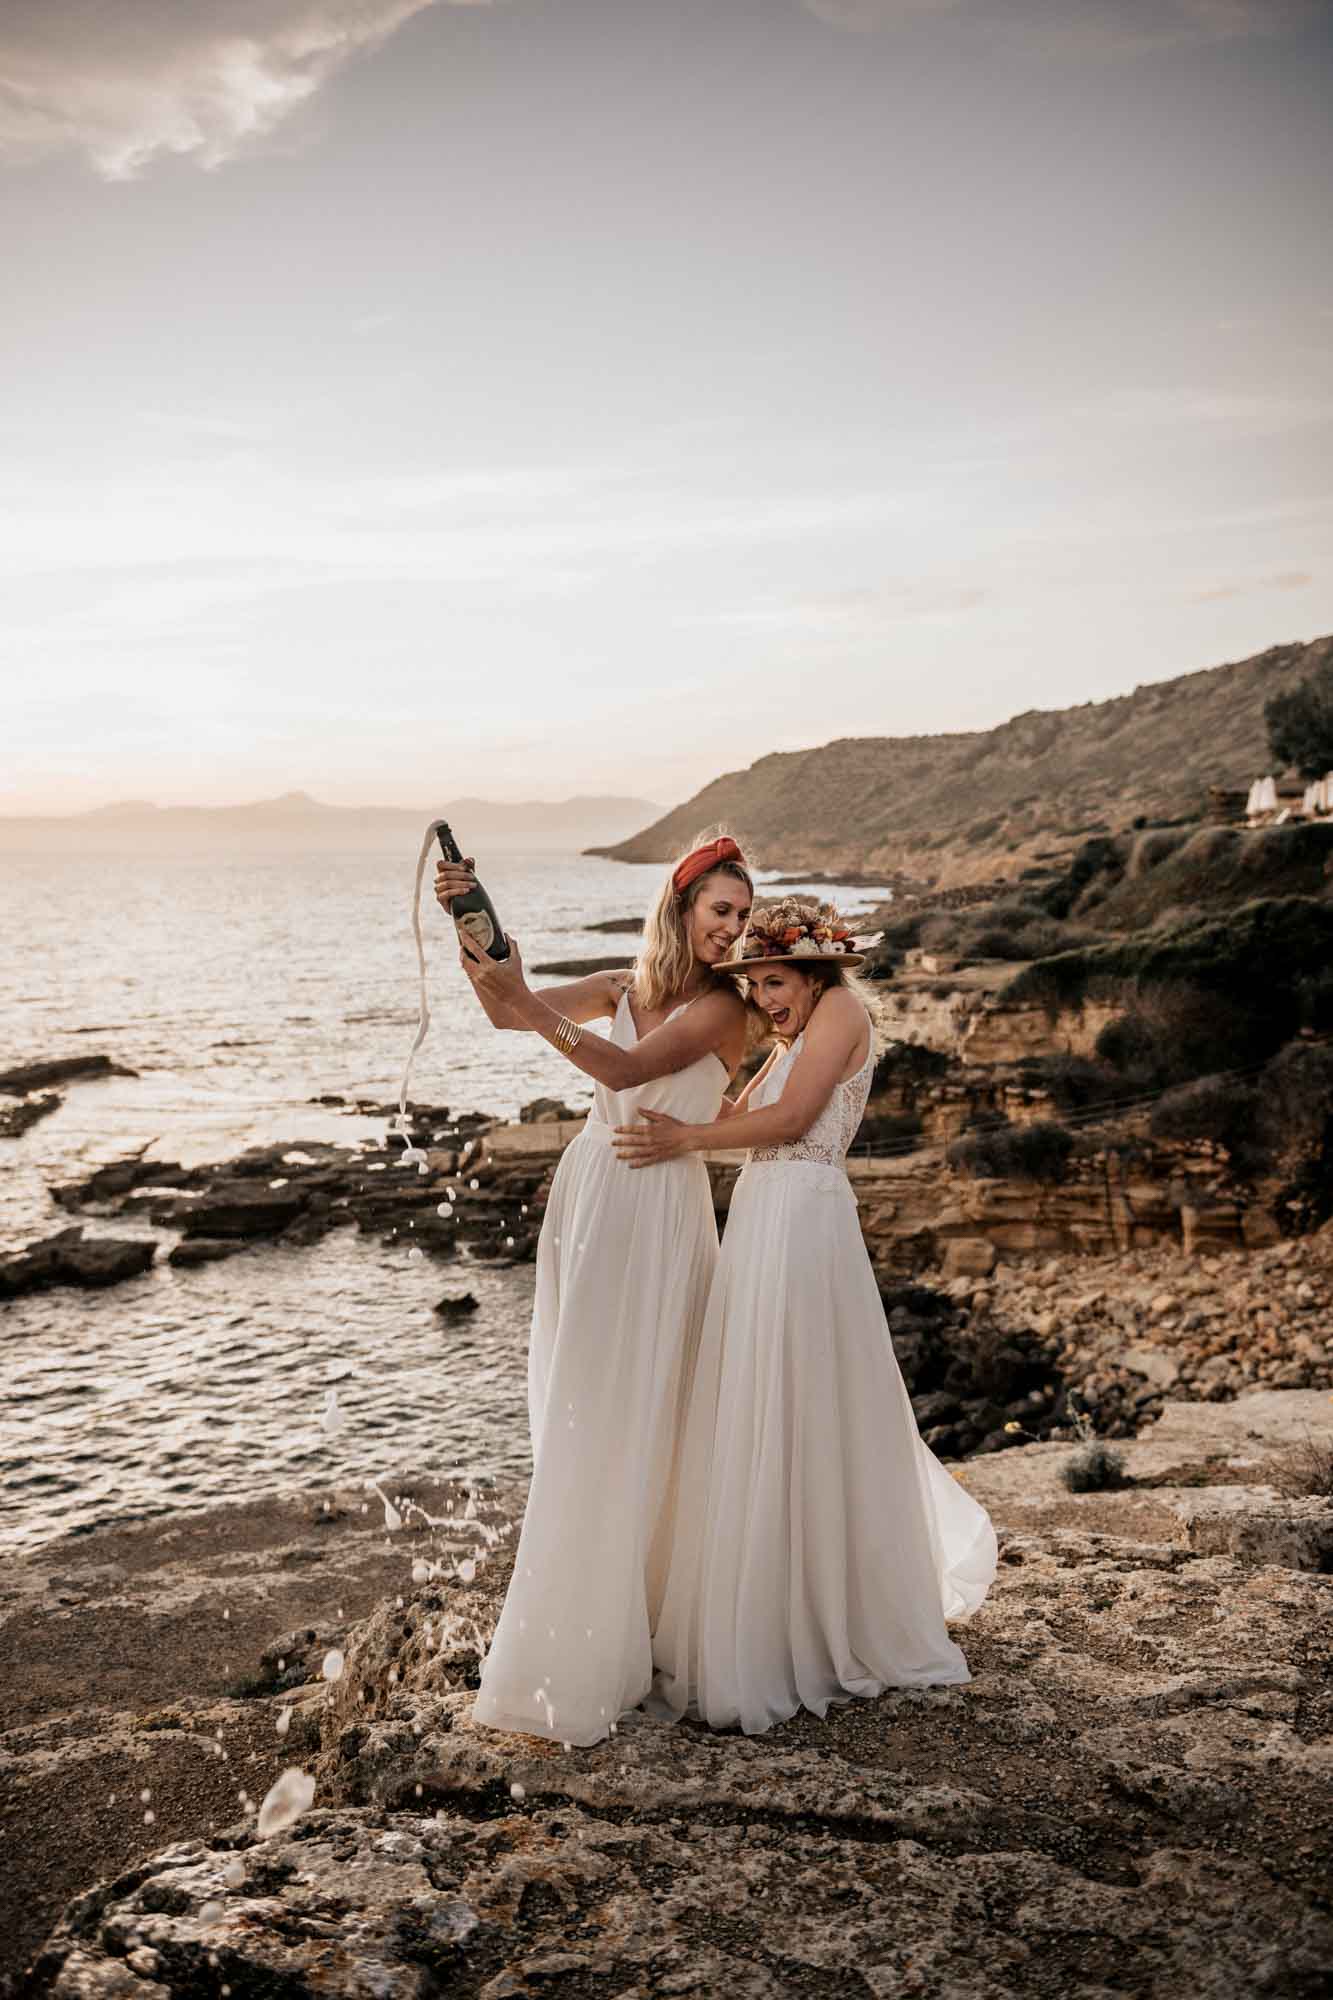 Epic surprise proposal during a styled shoot on the shores of Mallorca | Ilona Antina Photography | Featured on Equally Wed, the leading LGBTQ+ wedding magazine - black outfits